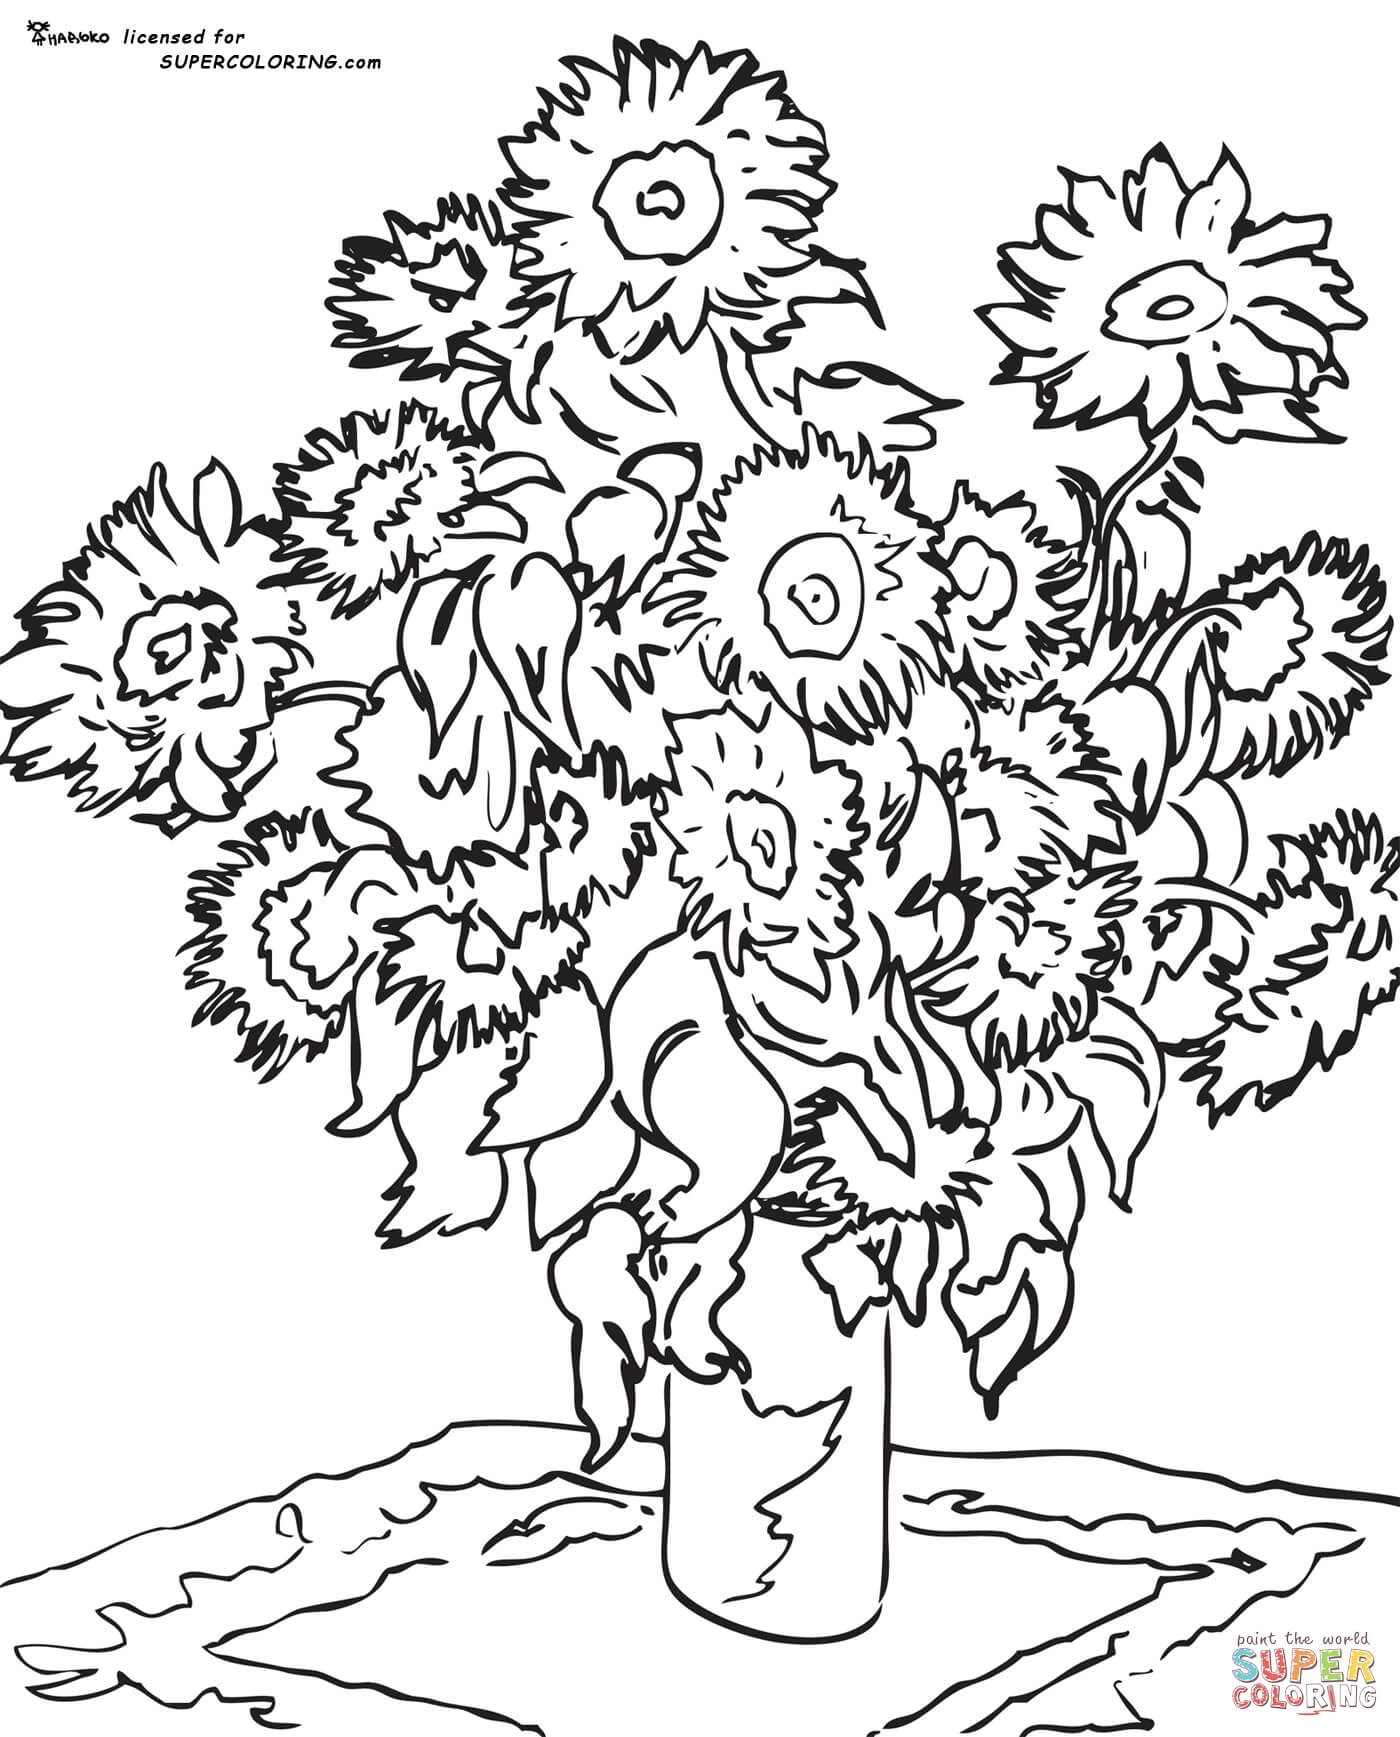 Vincent Van Gogh Coloring Pages at Free printable